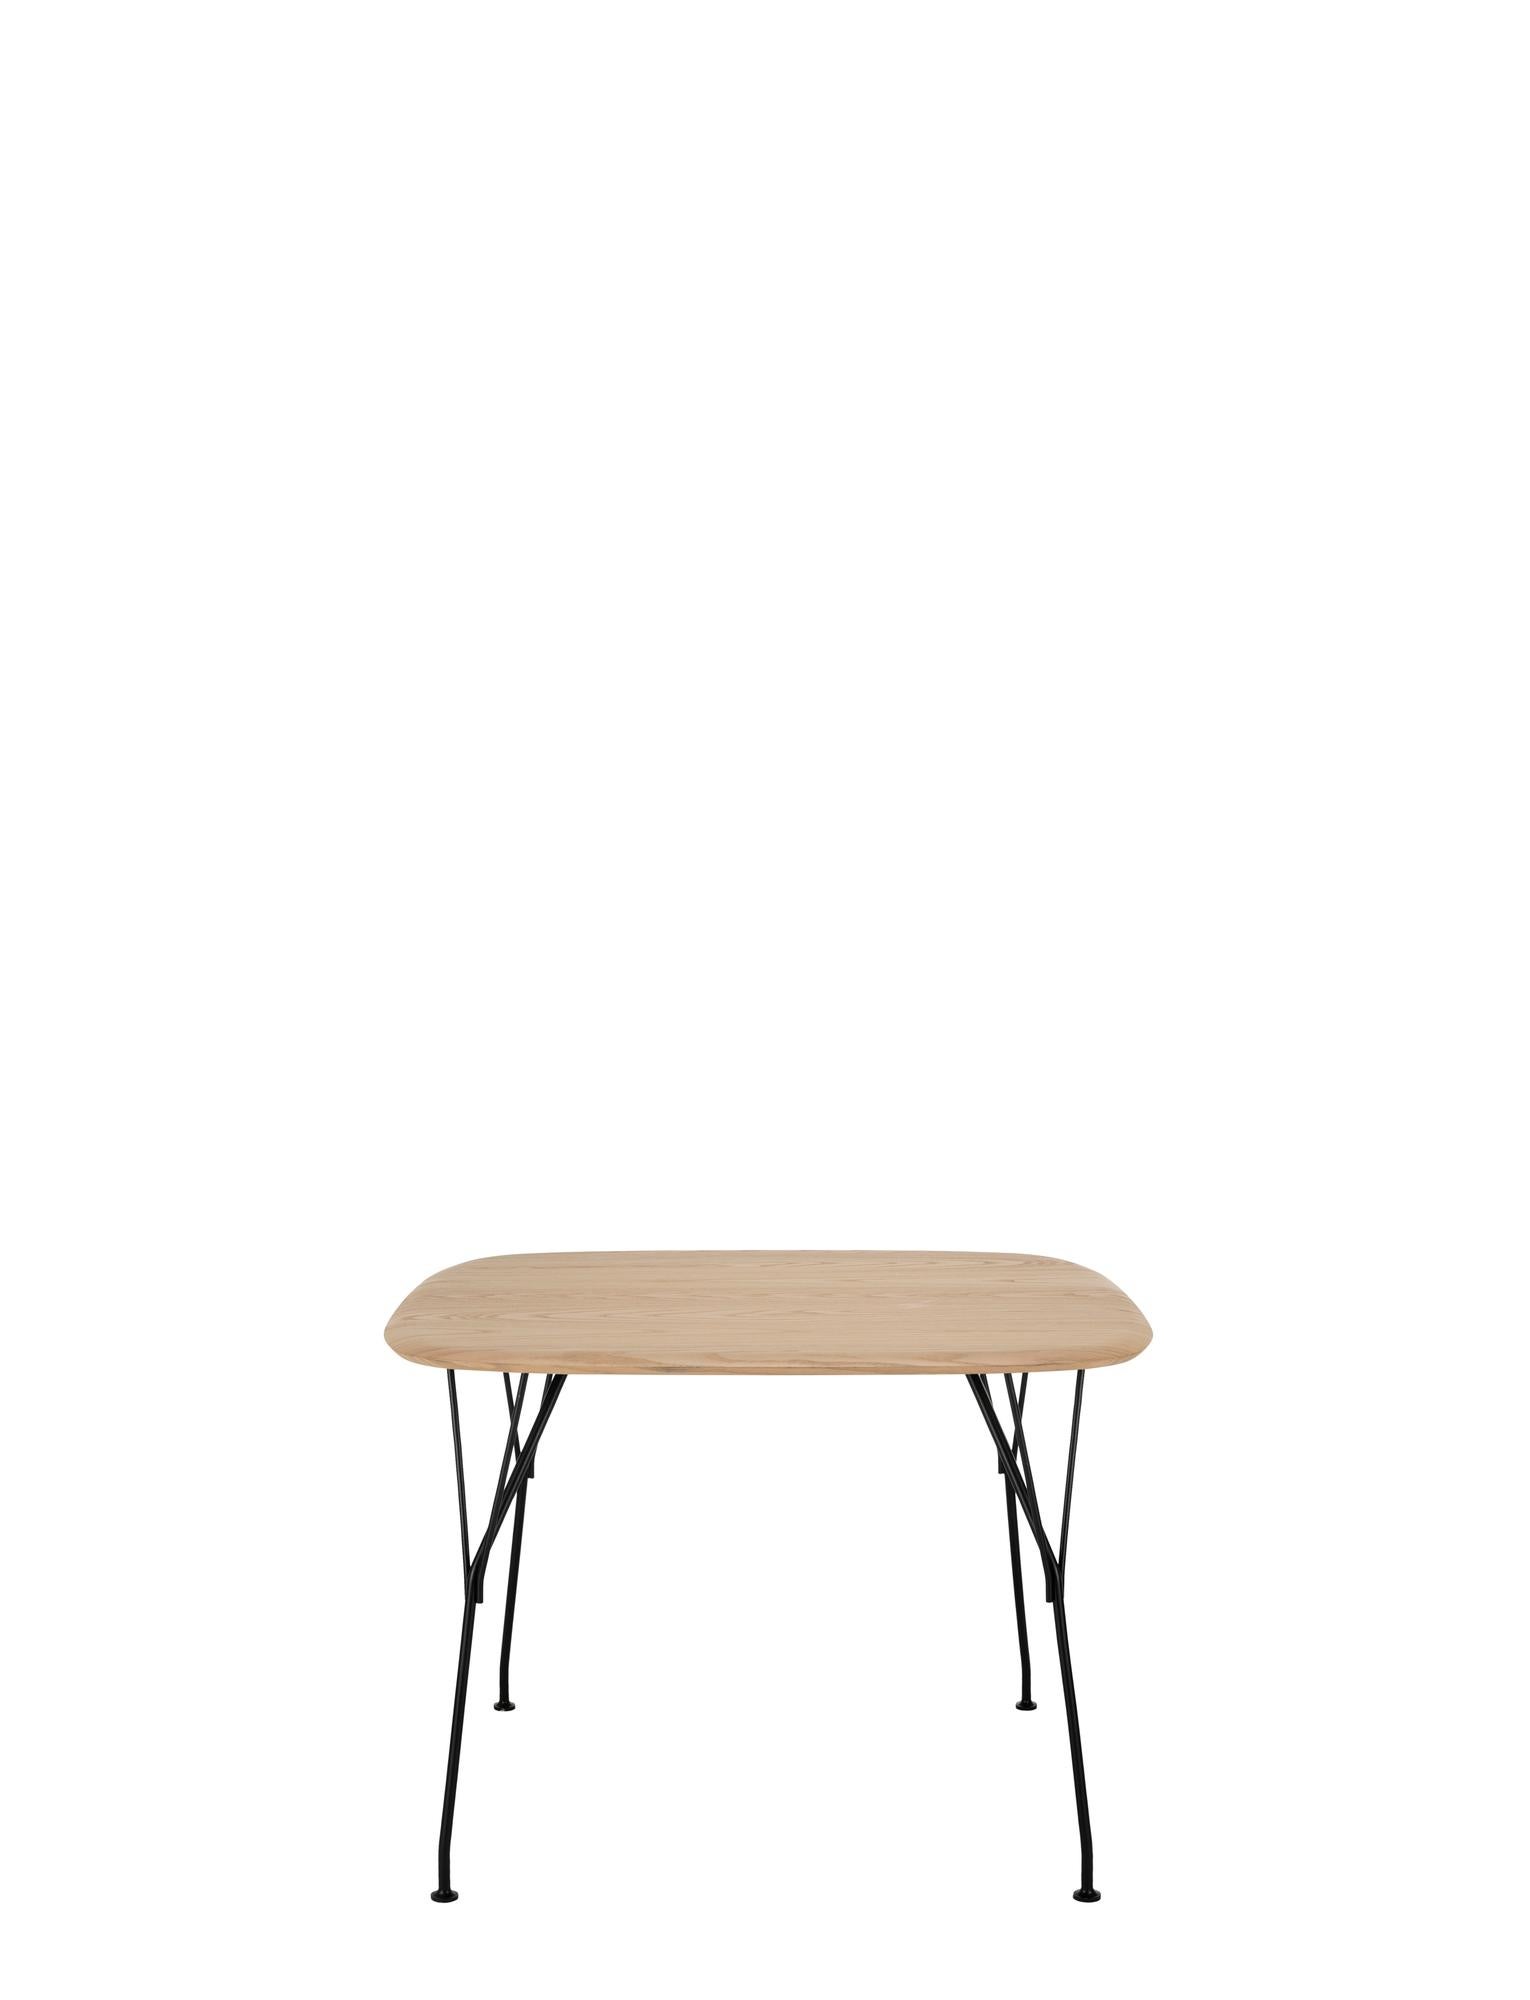 Viscount of wood tables are the latest addition. These naturally composed tables complement the collection's choice of seats and create a sustainable living area in which wood plays a central role thanks to its lightweight properties. These large